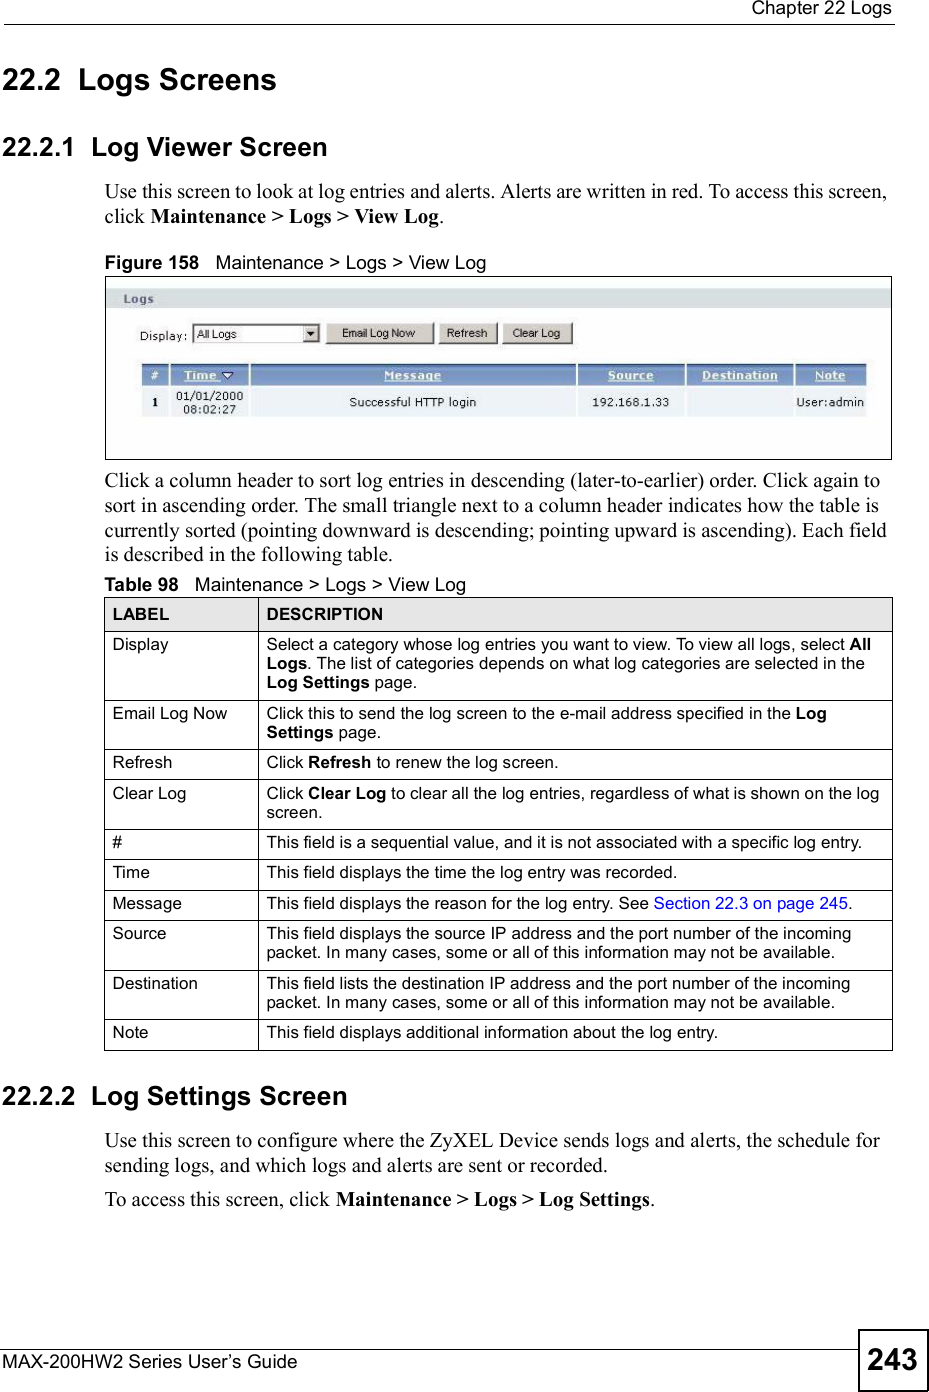  Chapter 22LogsMAX-200HW2 Series User s Guide 24322.2  Logs Screens22.2.1  Log Viewer ScreenUse this screen to look at log entries and alerts. Alerts are written in red. To access this screen, click Maintenance &gt; Logs &gt; View Log.Figure 158   Maintenance &gt; Logs &gt; View LogClick a column header to sort log entries in descending (later-to-earlier) order. Click again to sort in ascending order. The small triangle next to a column header indicates how the table is currently sorted (pointing downward is descending; pointing upward is ascending). Each field is described in the following table.22.2.2  Log Settings ScreenUse this screen to configure where the ZyXEL Device sends logs and alerts, the schedule for sending logs, and which logs and alerts are sent or recorded.To access this screen, click Maintenance &gt; Logs &gt; Log Settings.Table 98   Maintenance &gt; Logs &gt; View LogLABEL DESCRIPTIONDisplay Select a category whose log entries you want to view. To view all logs, select AllLogs. The list of categories depends on what log categories are selected in the Log Settings page.Email Log Now Click this to send the log screen to the e-mail address specified in the Log Settings page.Refresh Click Refresh to renew the log screen. Clear Log Click Clear Log to clear all the log entries, regardless of what is shown on the log screen.#This field is a sequential value, and it is not associated with a specific log entry.Time This field displays the time the log entry was recorded.Message This field displays the reason for the log entry. See Section 22.3 on page 245.Source This field displays the source IP address and the port number of the incoming packet. In many cases, some or all of this information may not be available.Destination This field lists the destination IP address and the port number of the incoming packet. In many cases, some or all of this information may not be available.Note This field displays additional information about the log entry.